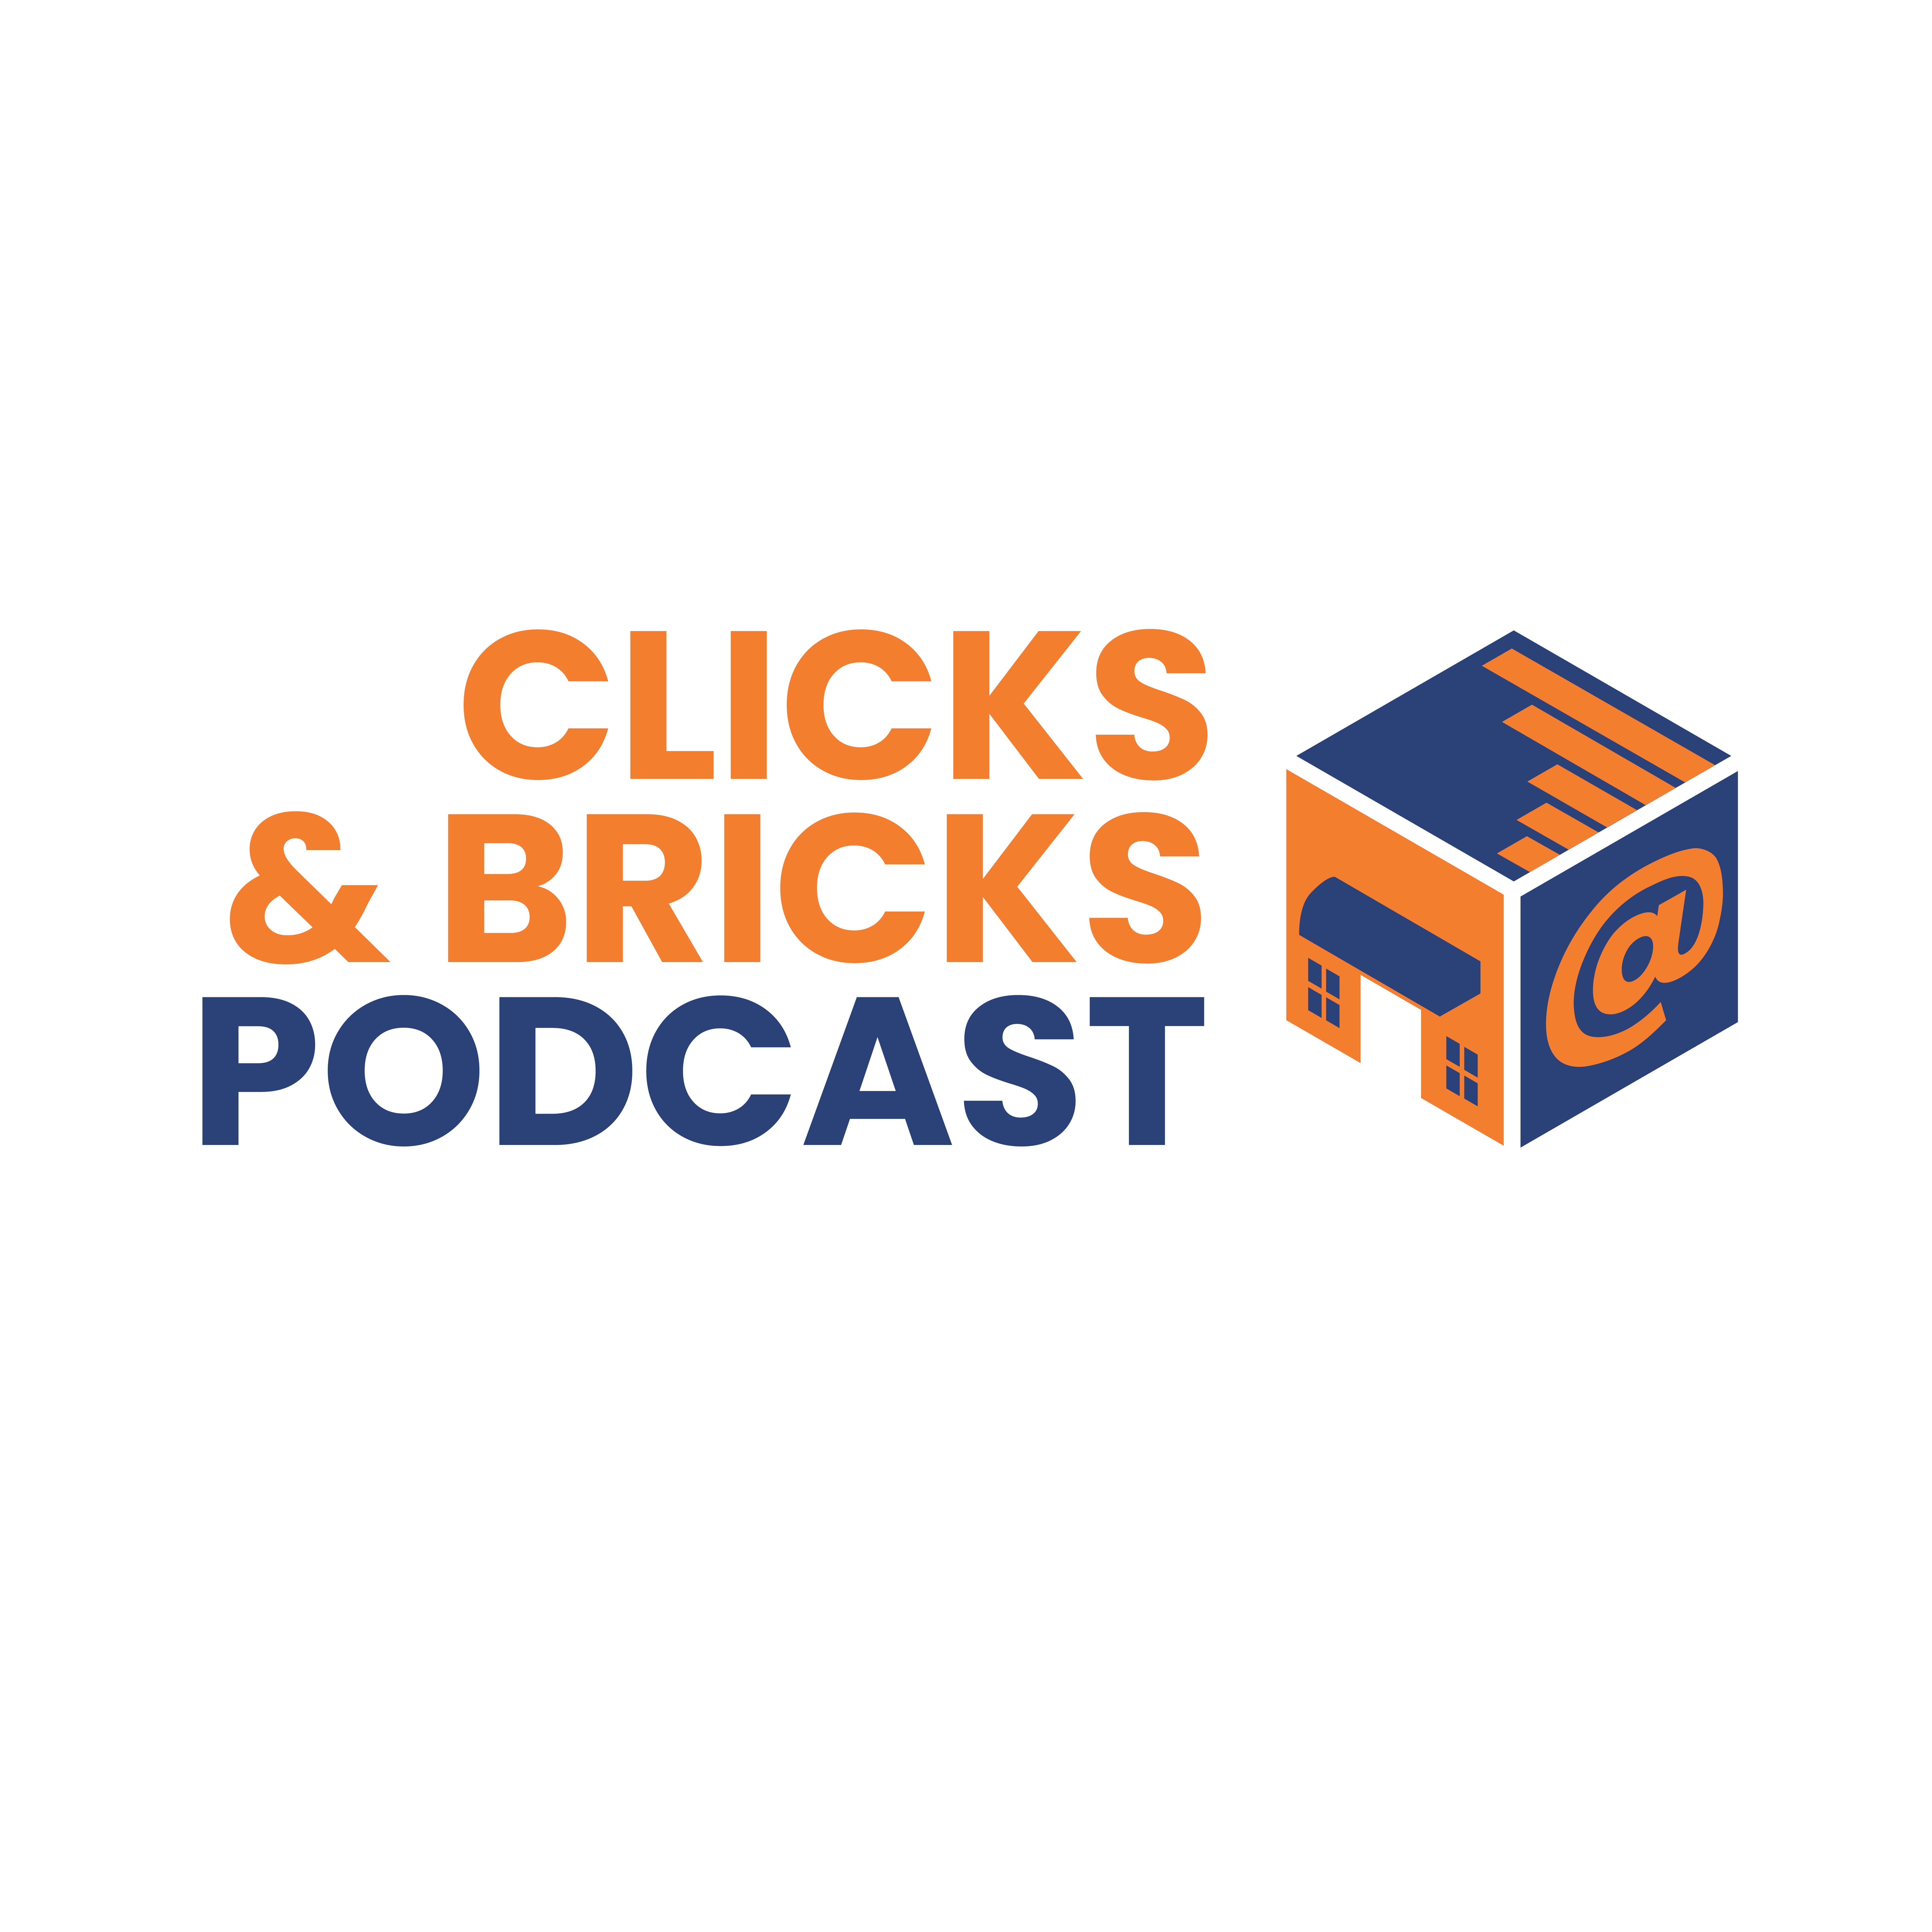 Clicks and Bricks Announces Interview with Joe Siecinski, Owner and Co-Founder of BrainSHARE